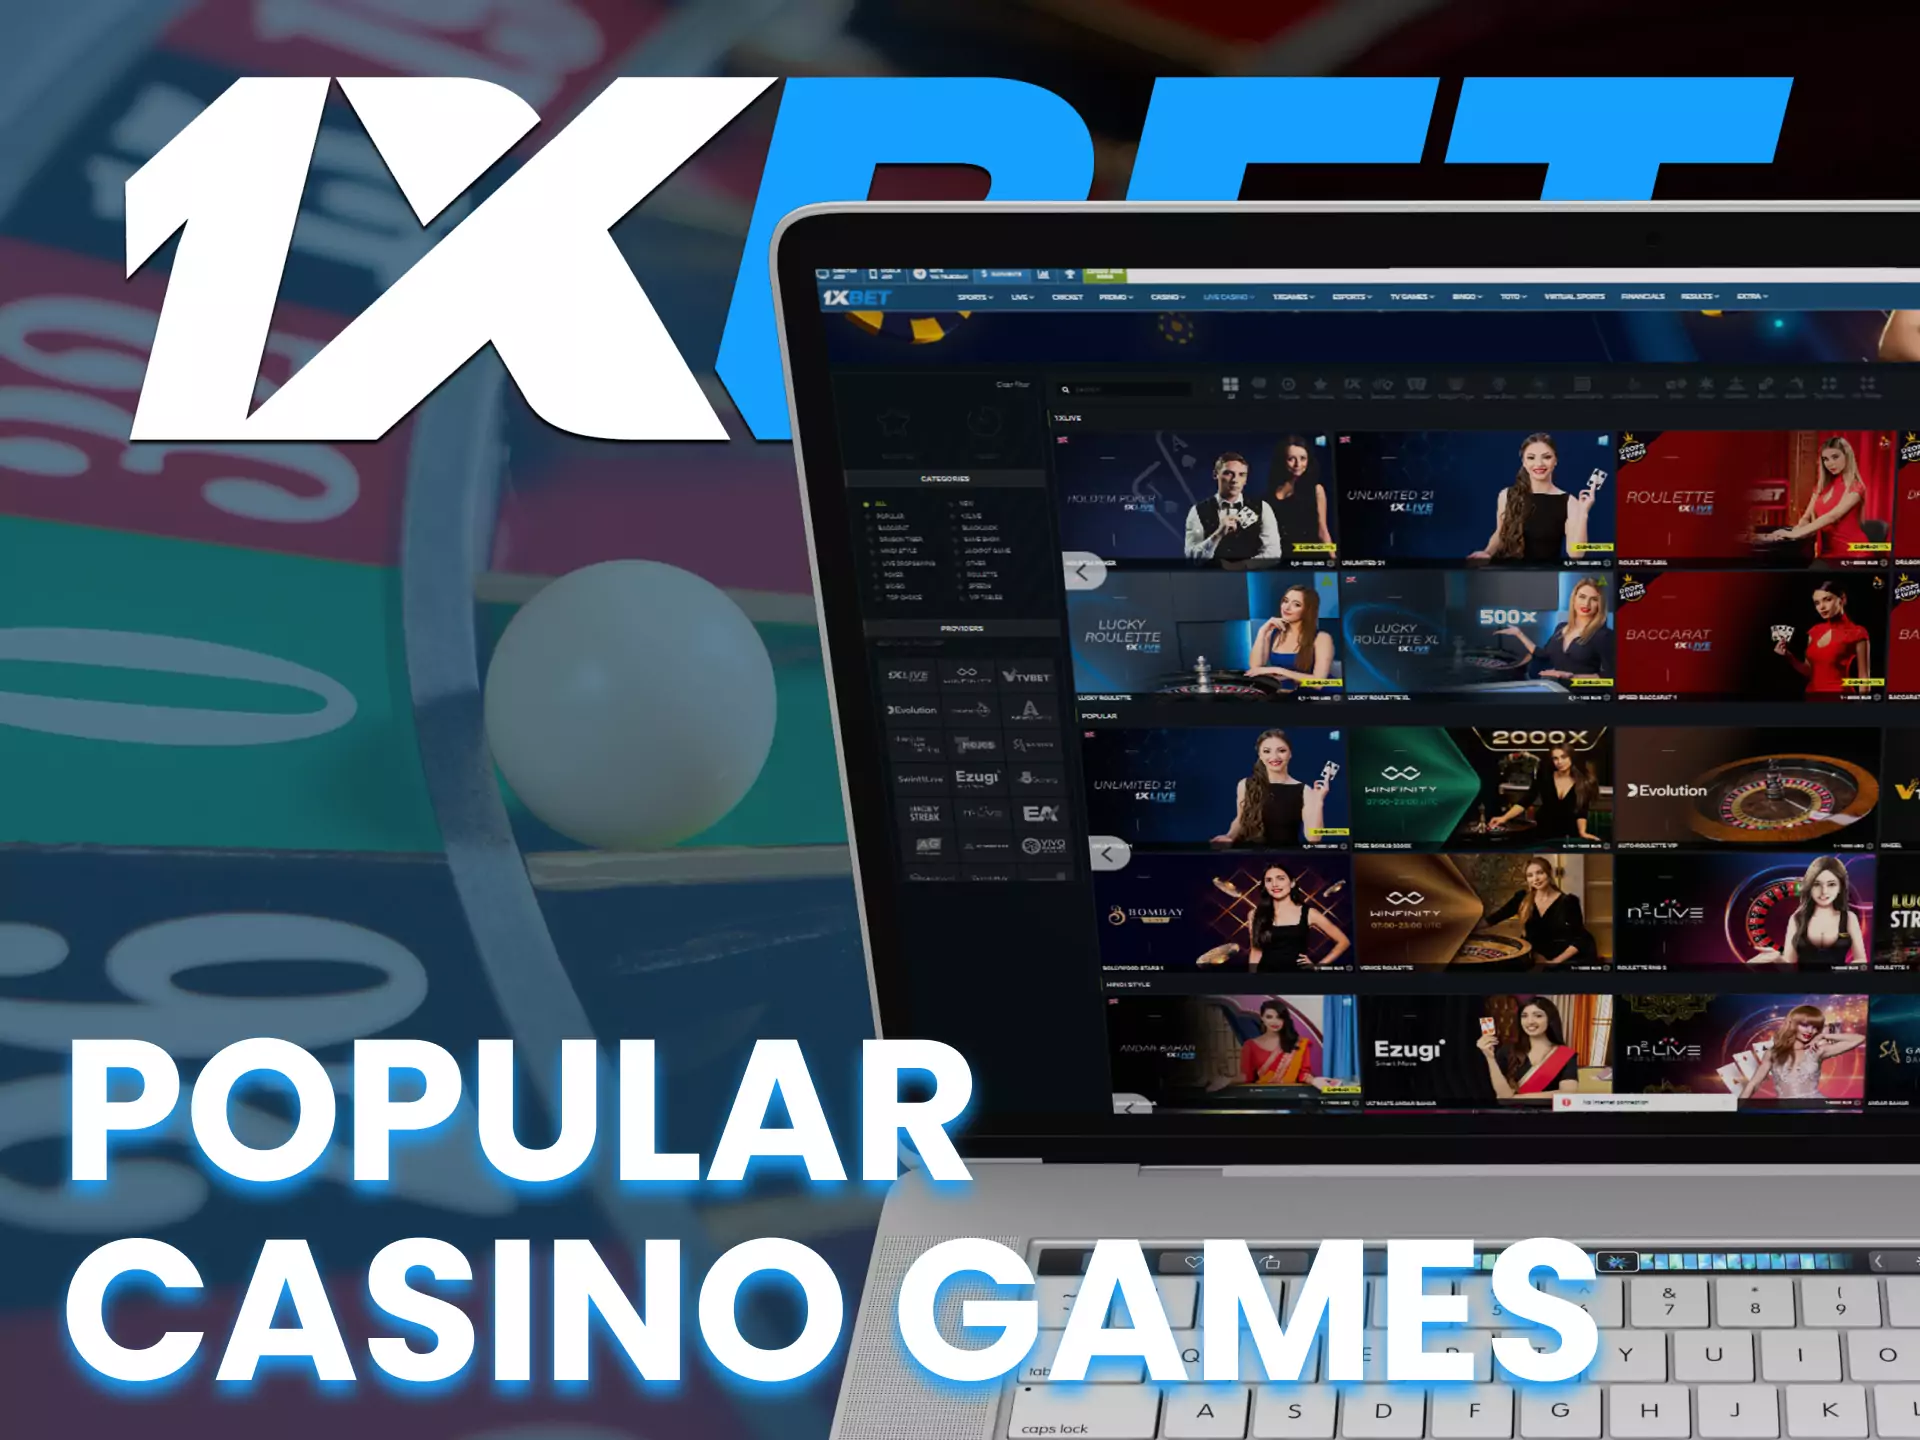 On 1XBET in the casino section you can play a lot of exciting games.